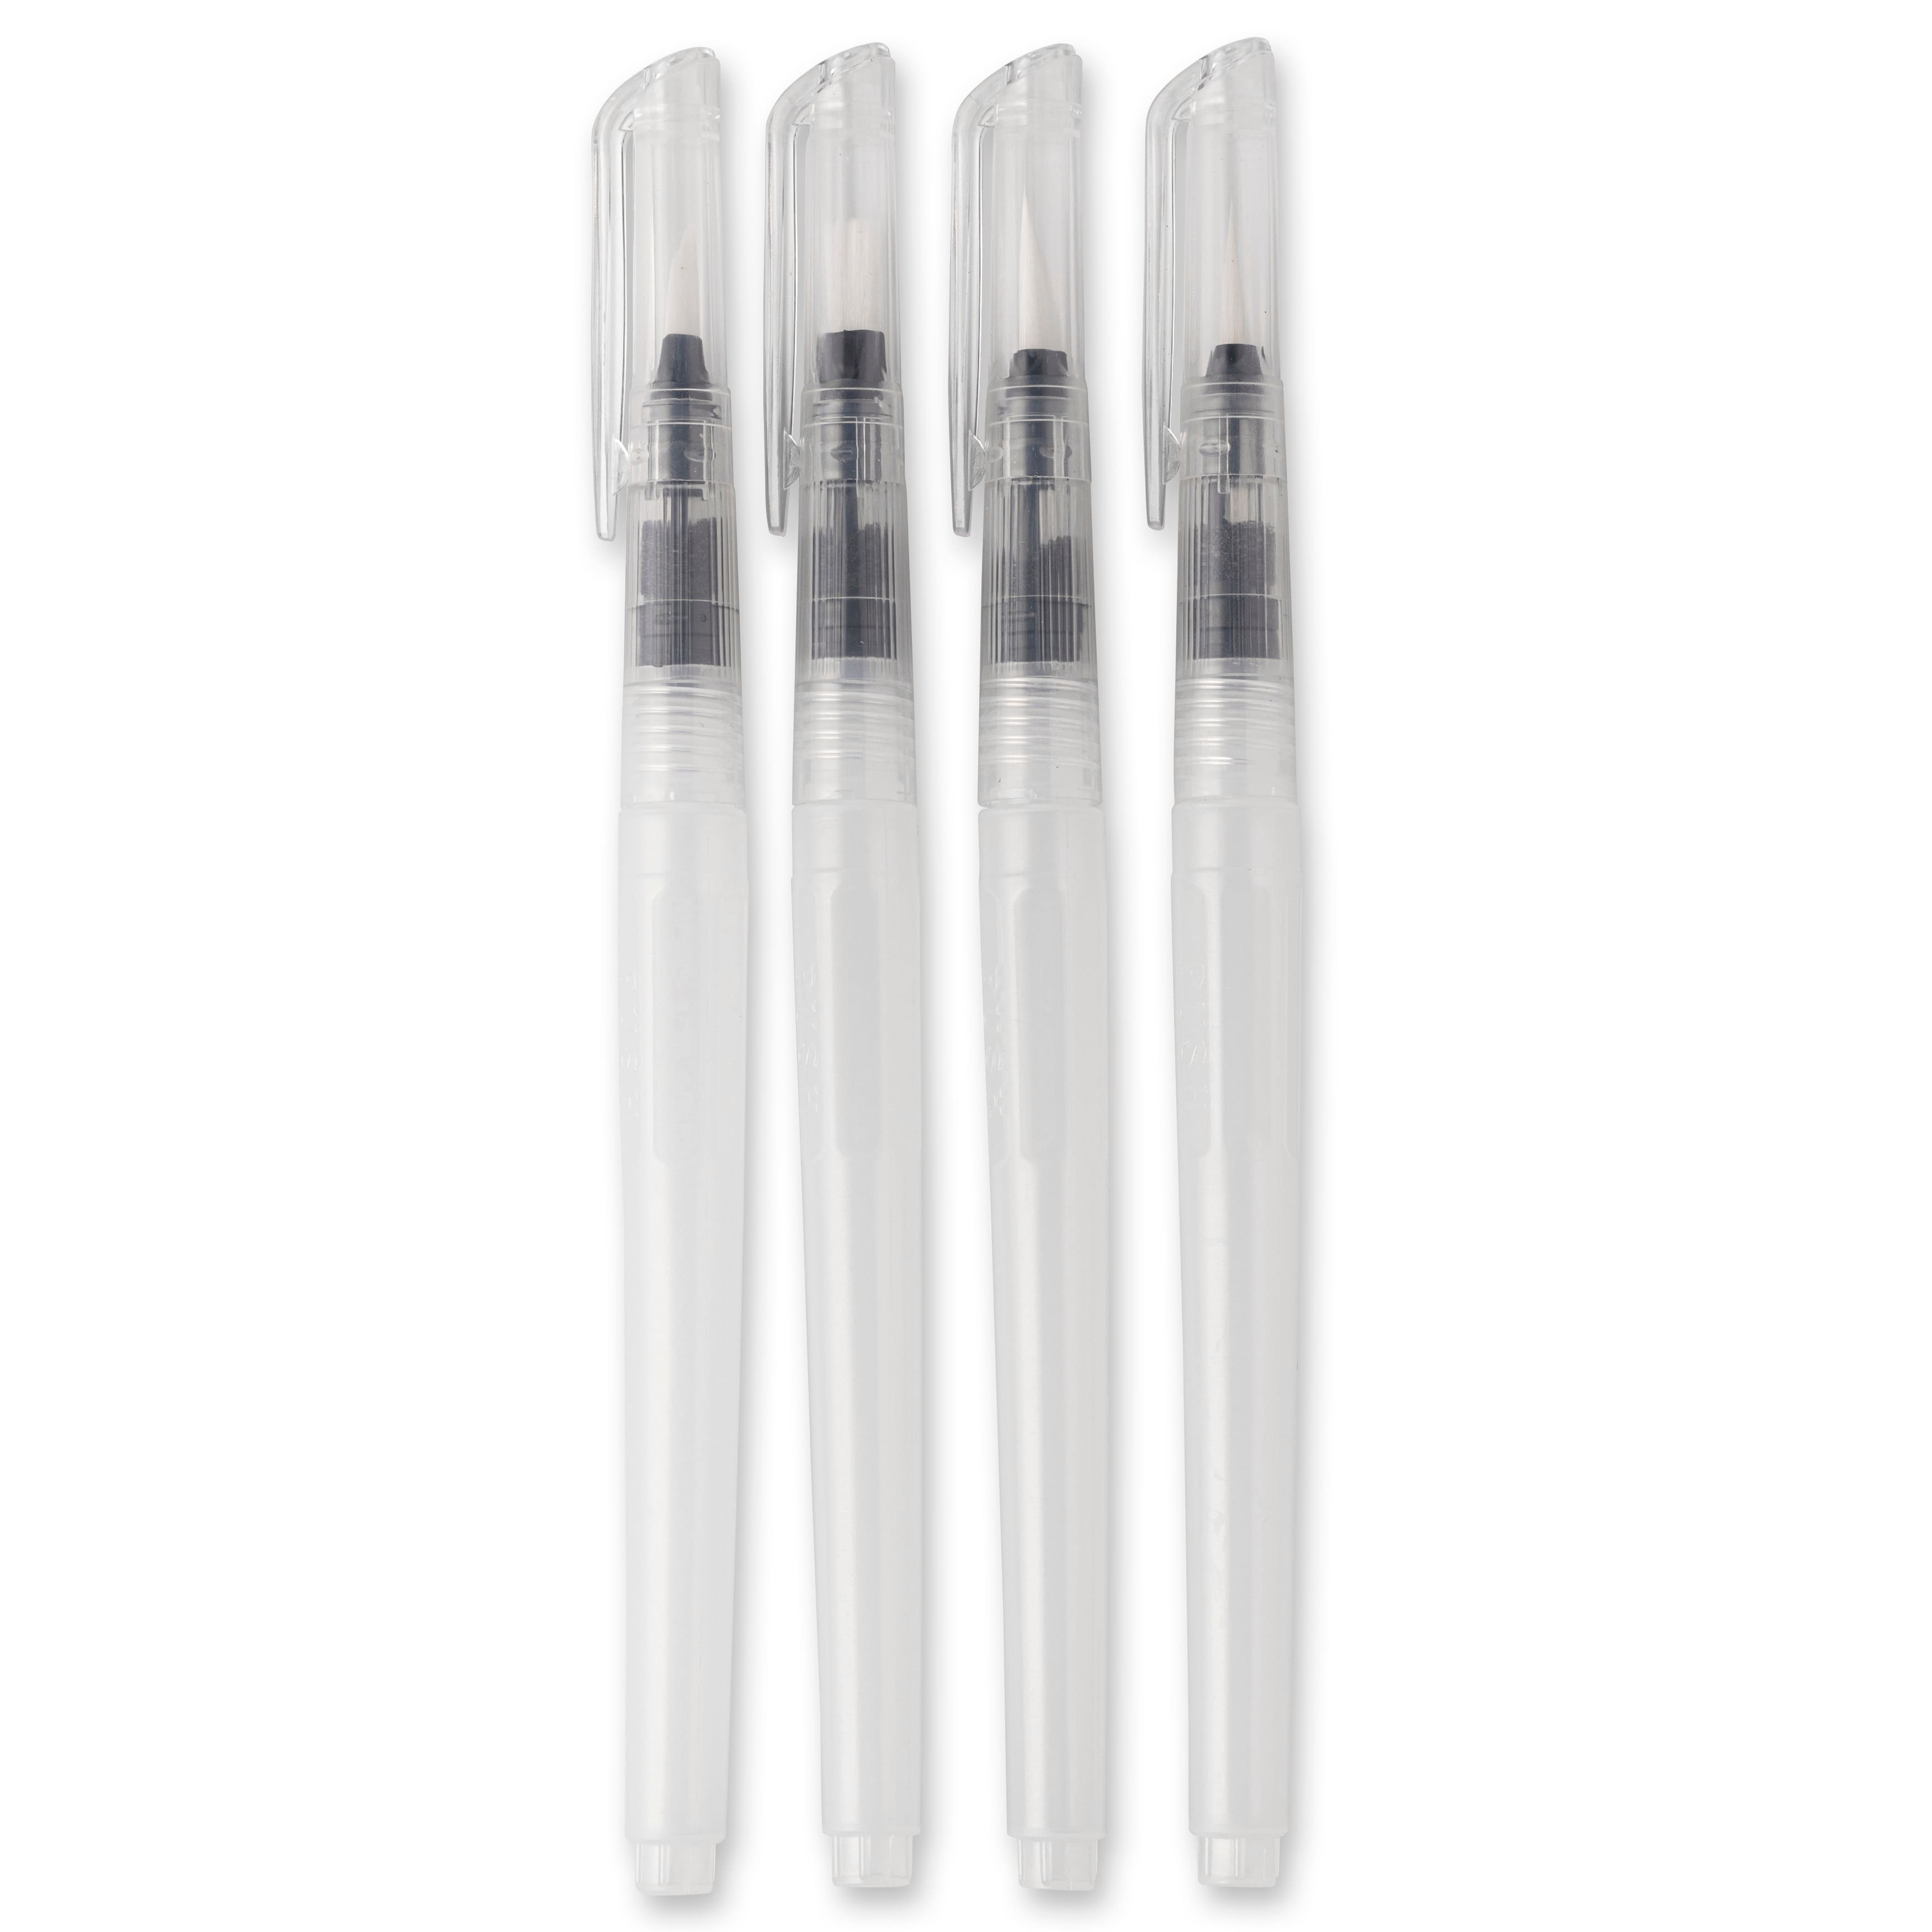 Water Brush Pens by Recollections&#x2122;, 4ct.